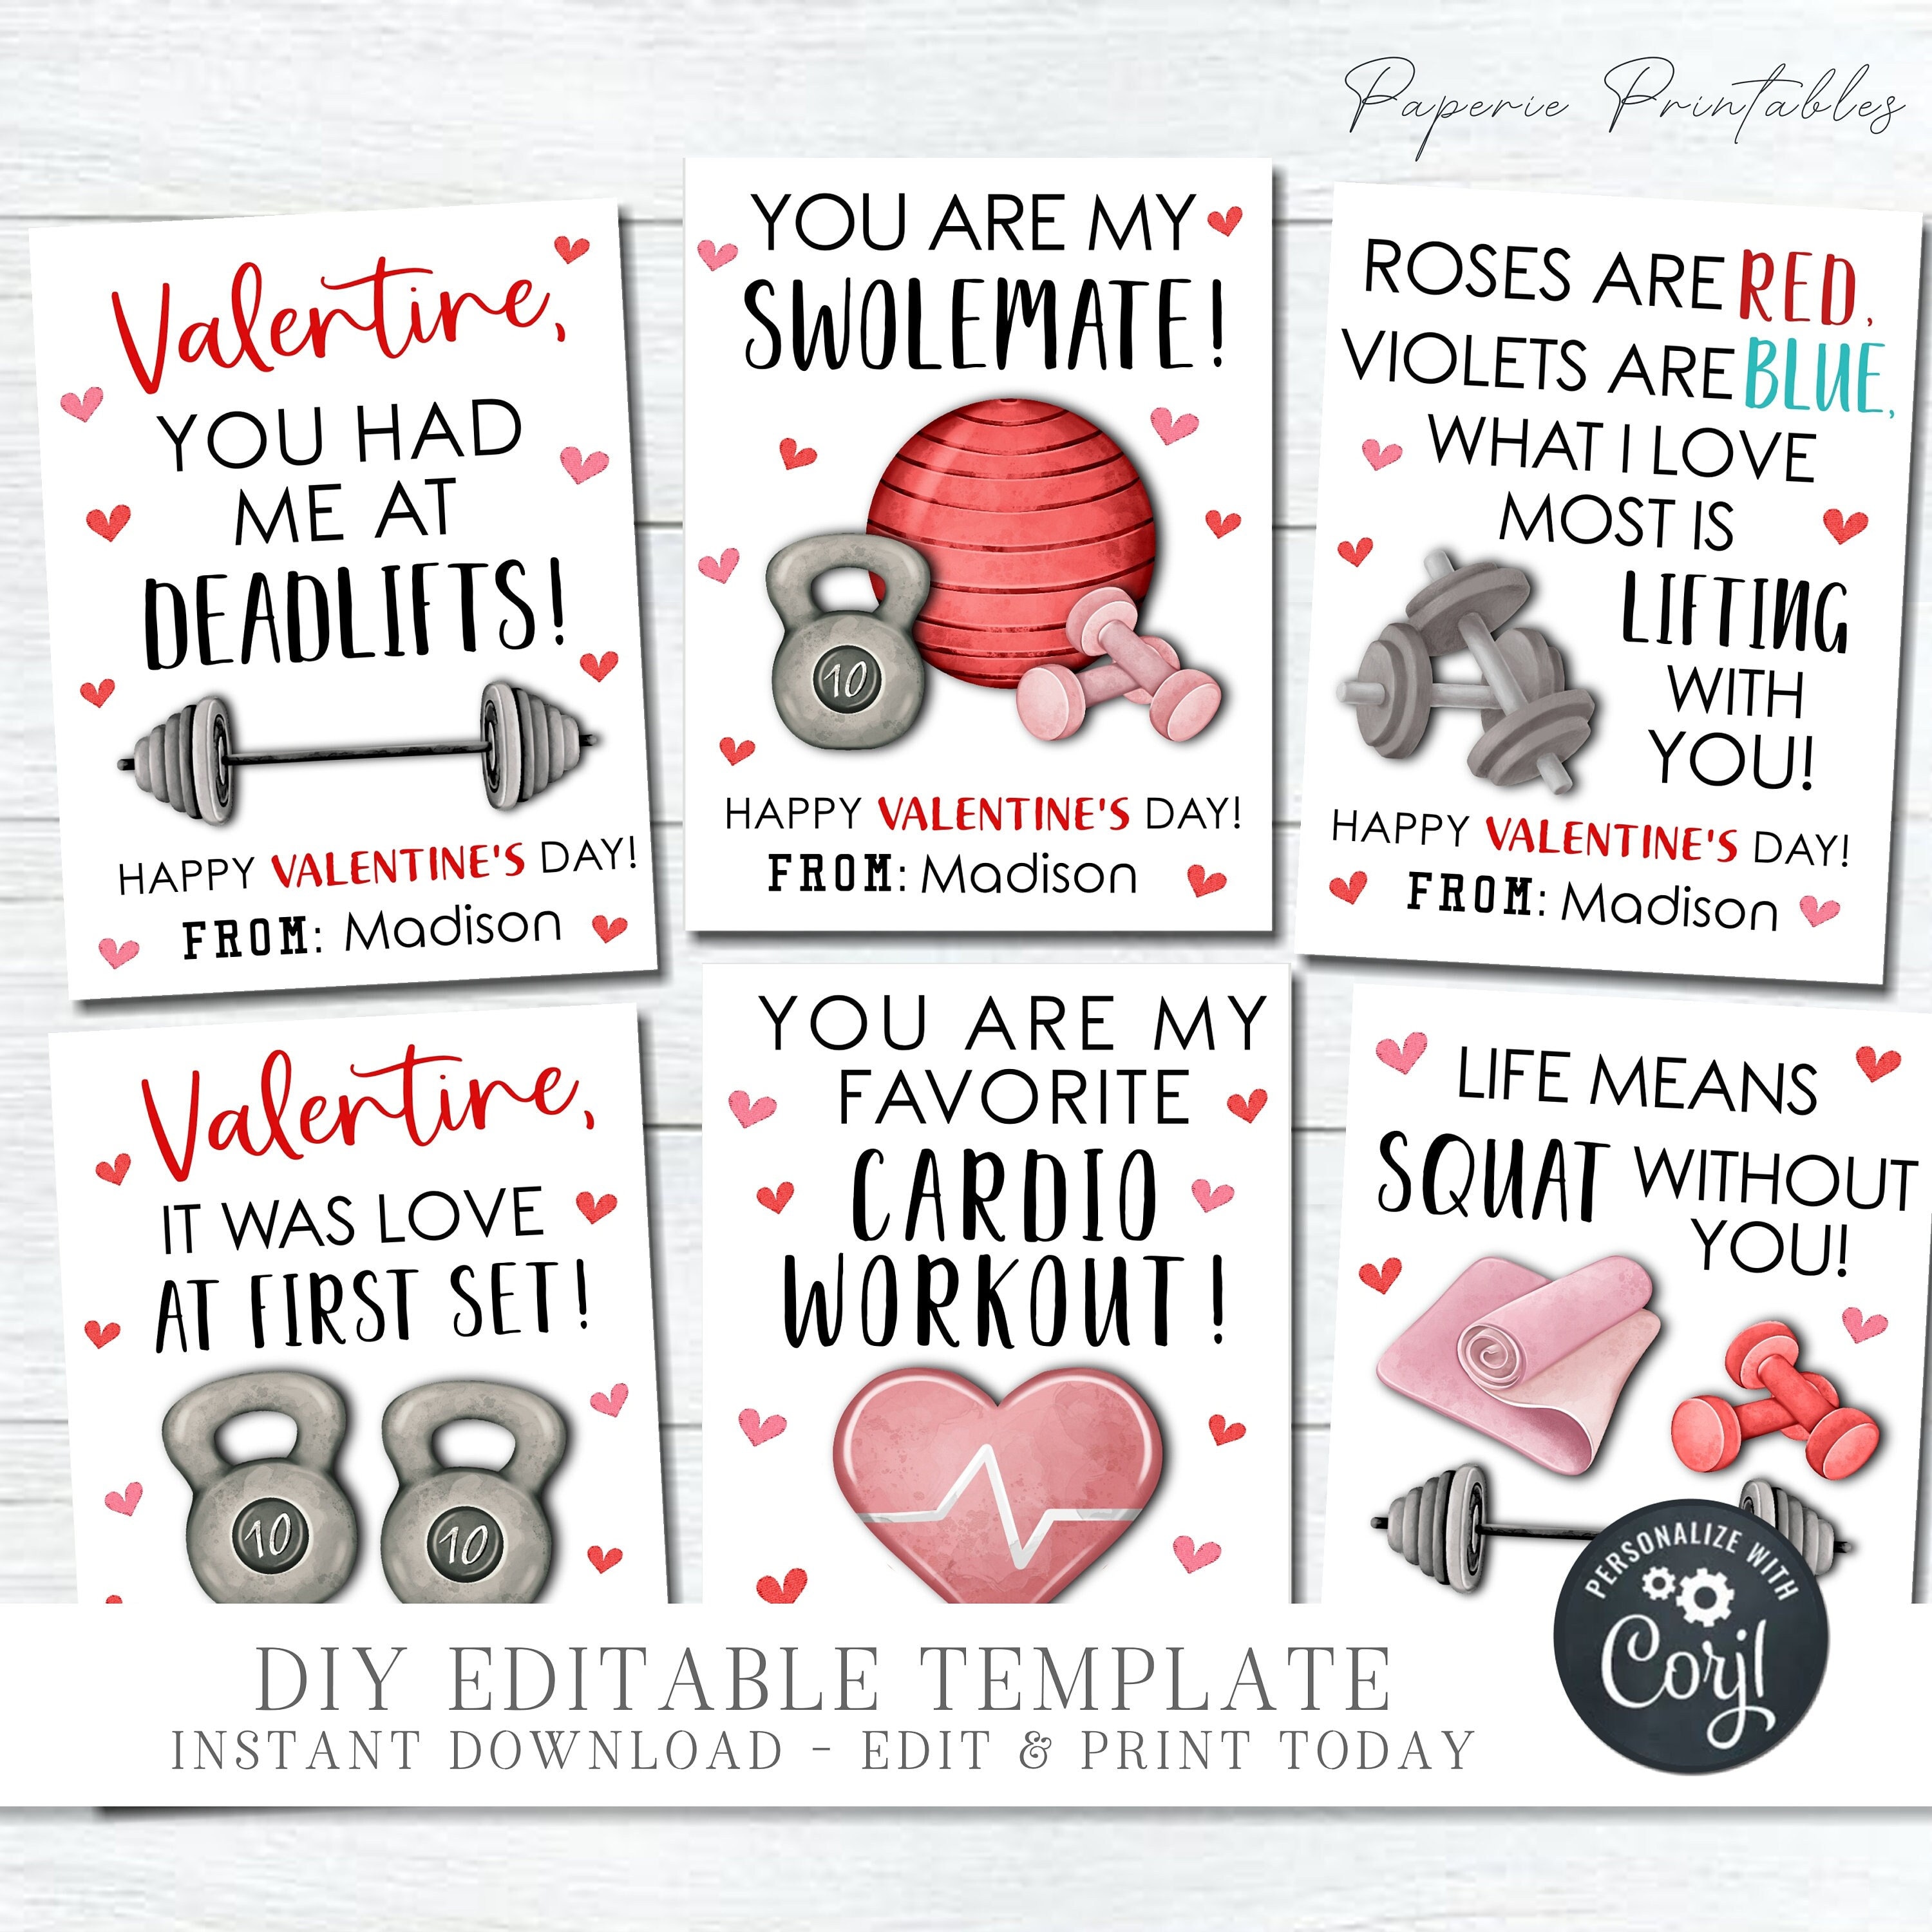 Happy Valentine's Day gifts for fit men|Valentine's Day gift ideas for men  2021|Gift ideas for gym lover and the energetic guy in your life | Sticker